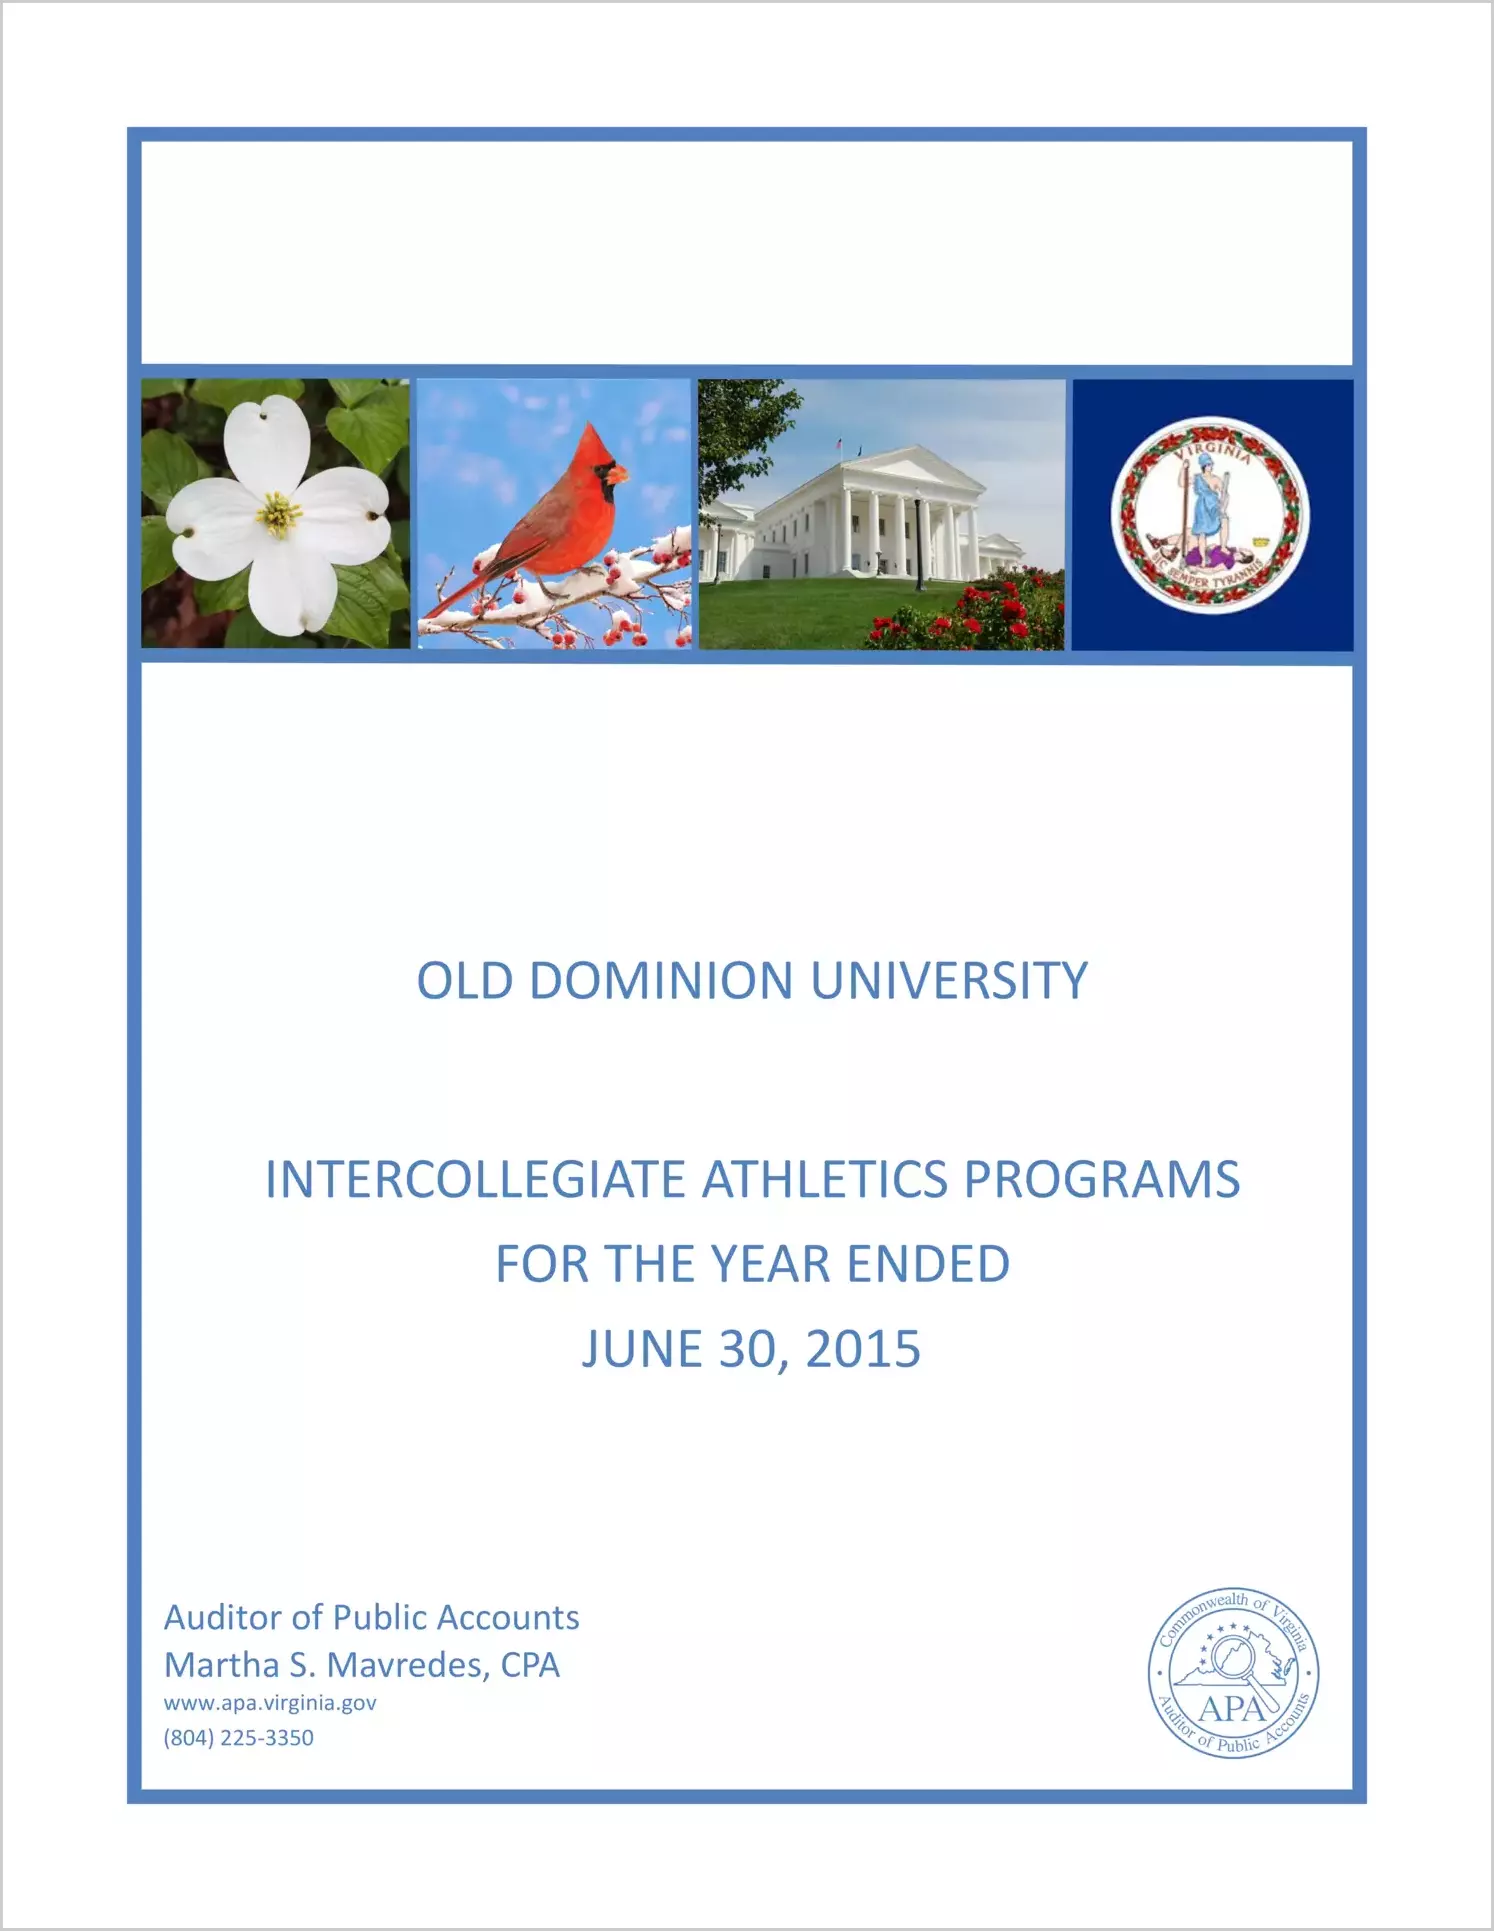 Old Dominion University Intercollegiate Athletics Programs for the year ended June 30, 2015